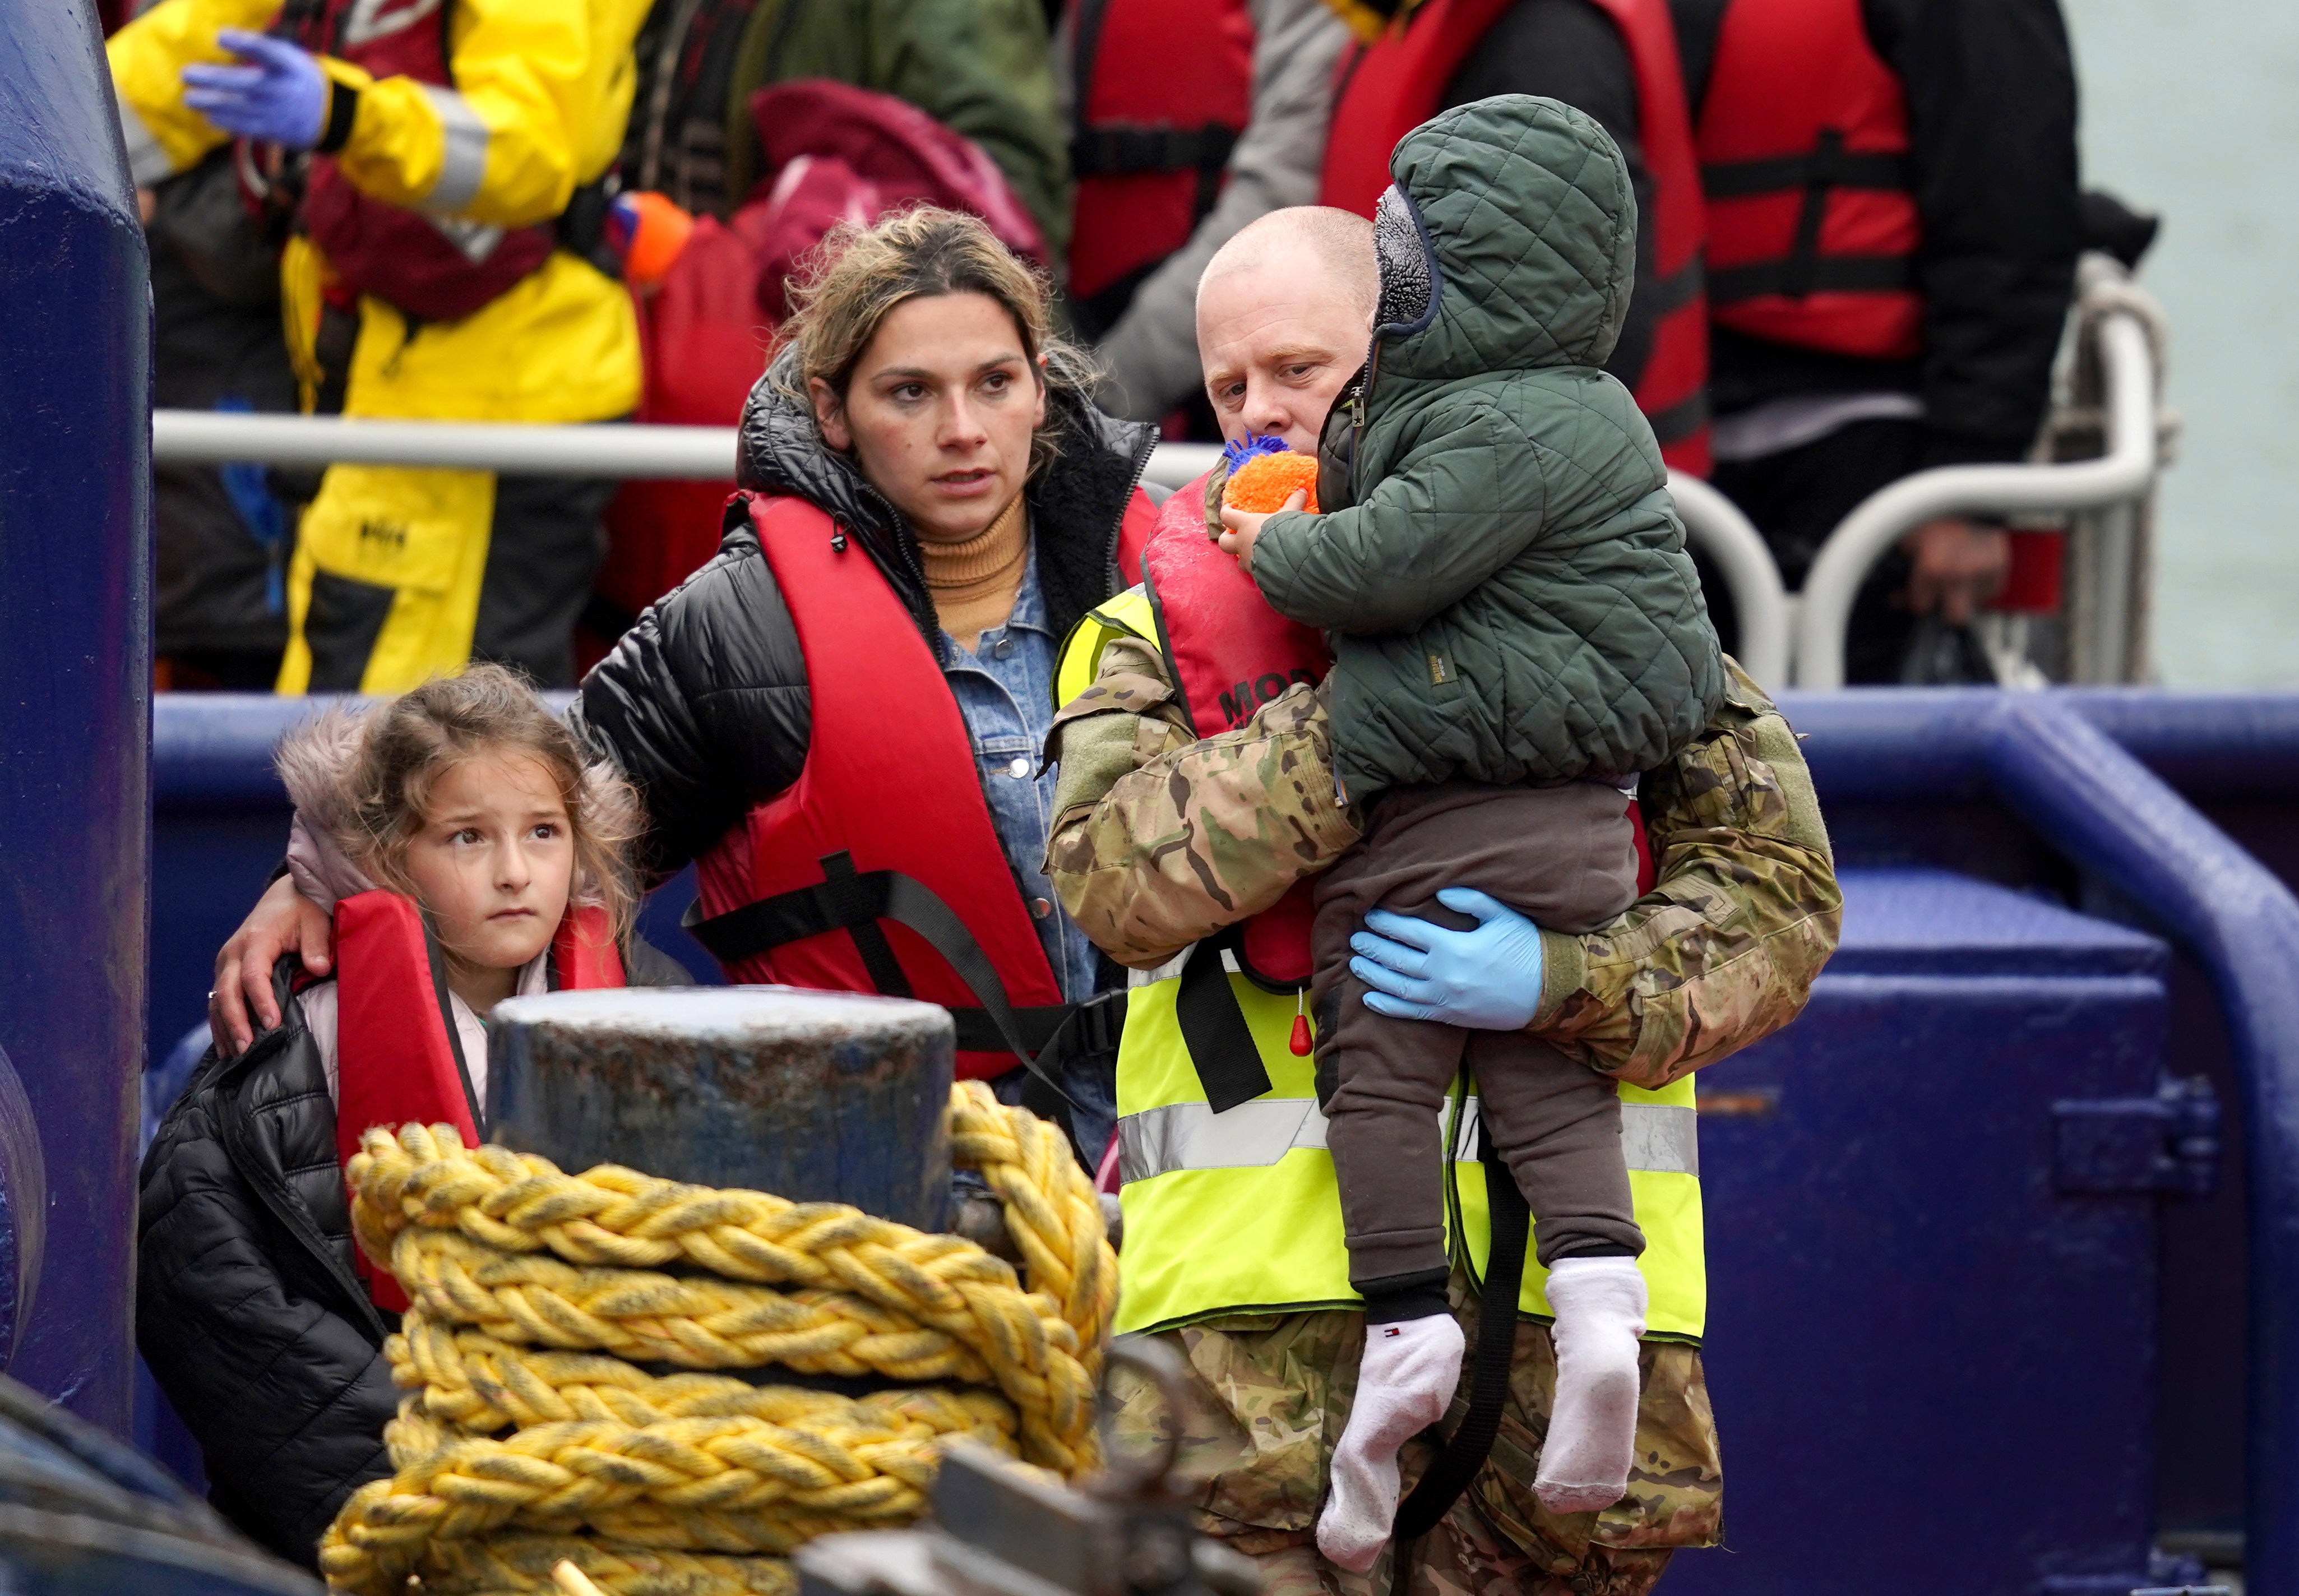 Young children and women are among the latest people to arrive in the UK after crossing the English Channel in small boats (Gareth Fuller/PA)